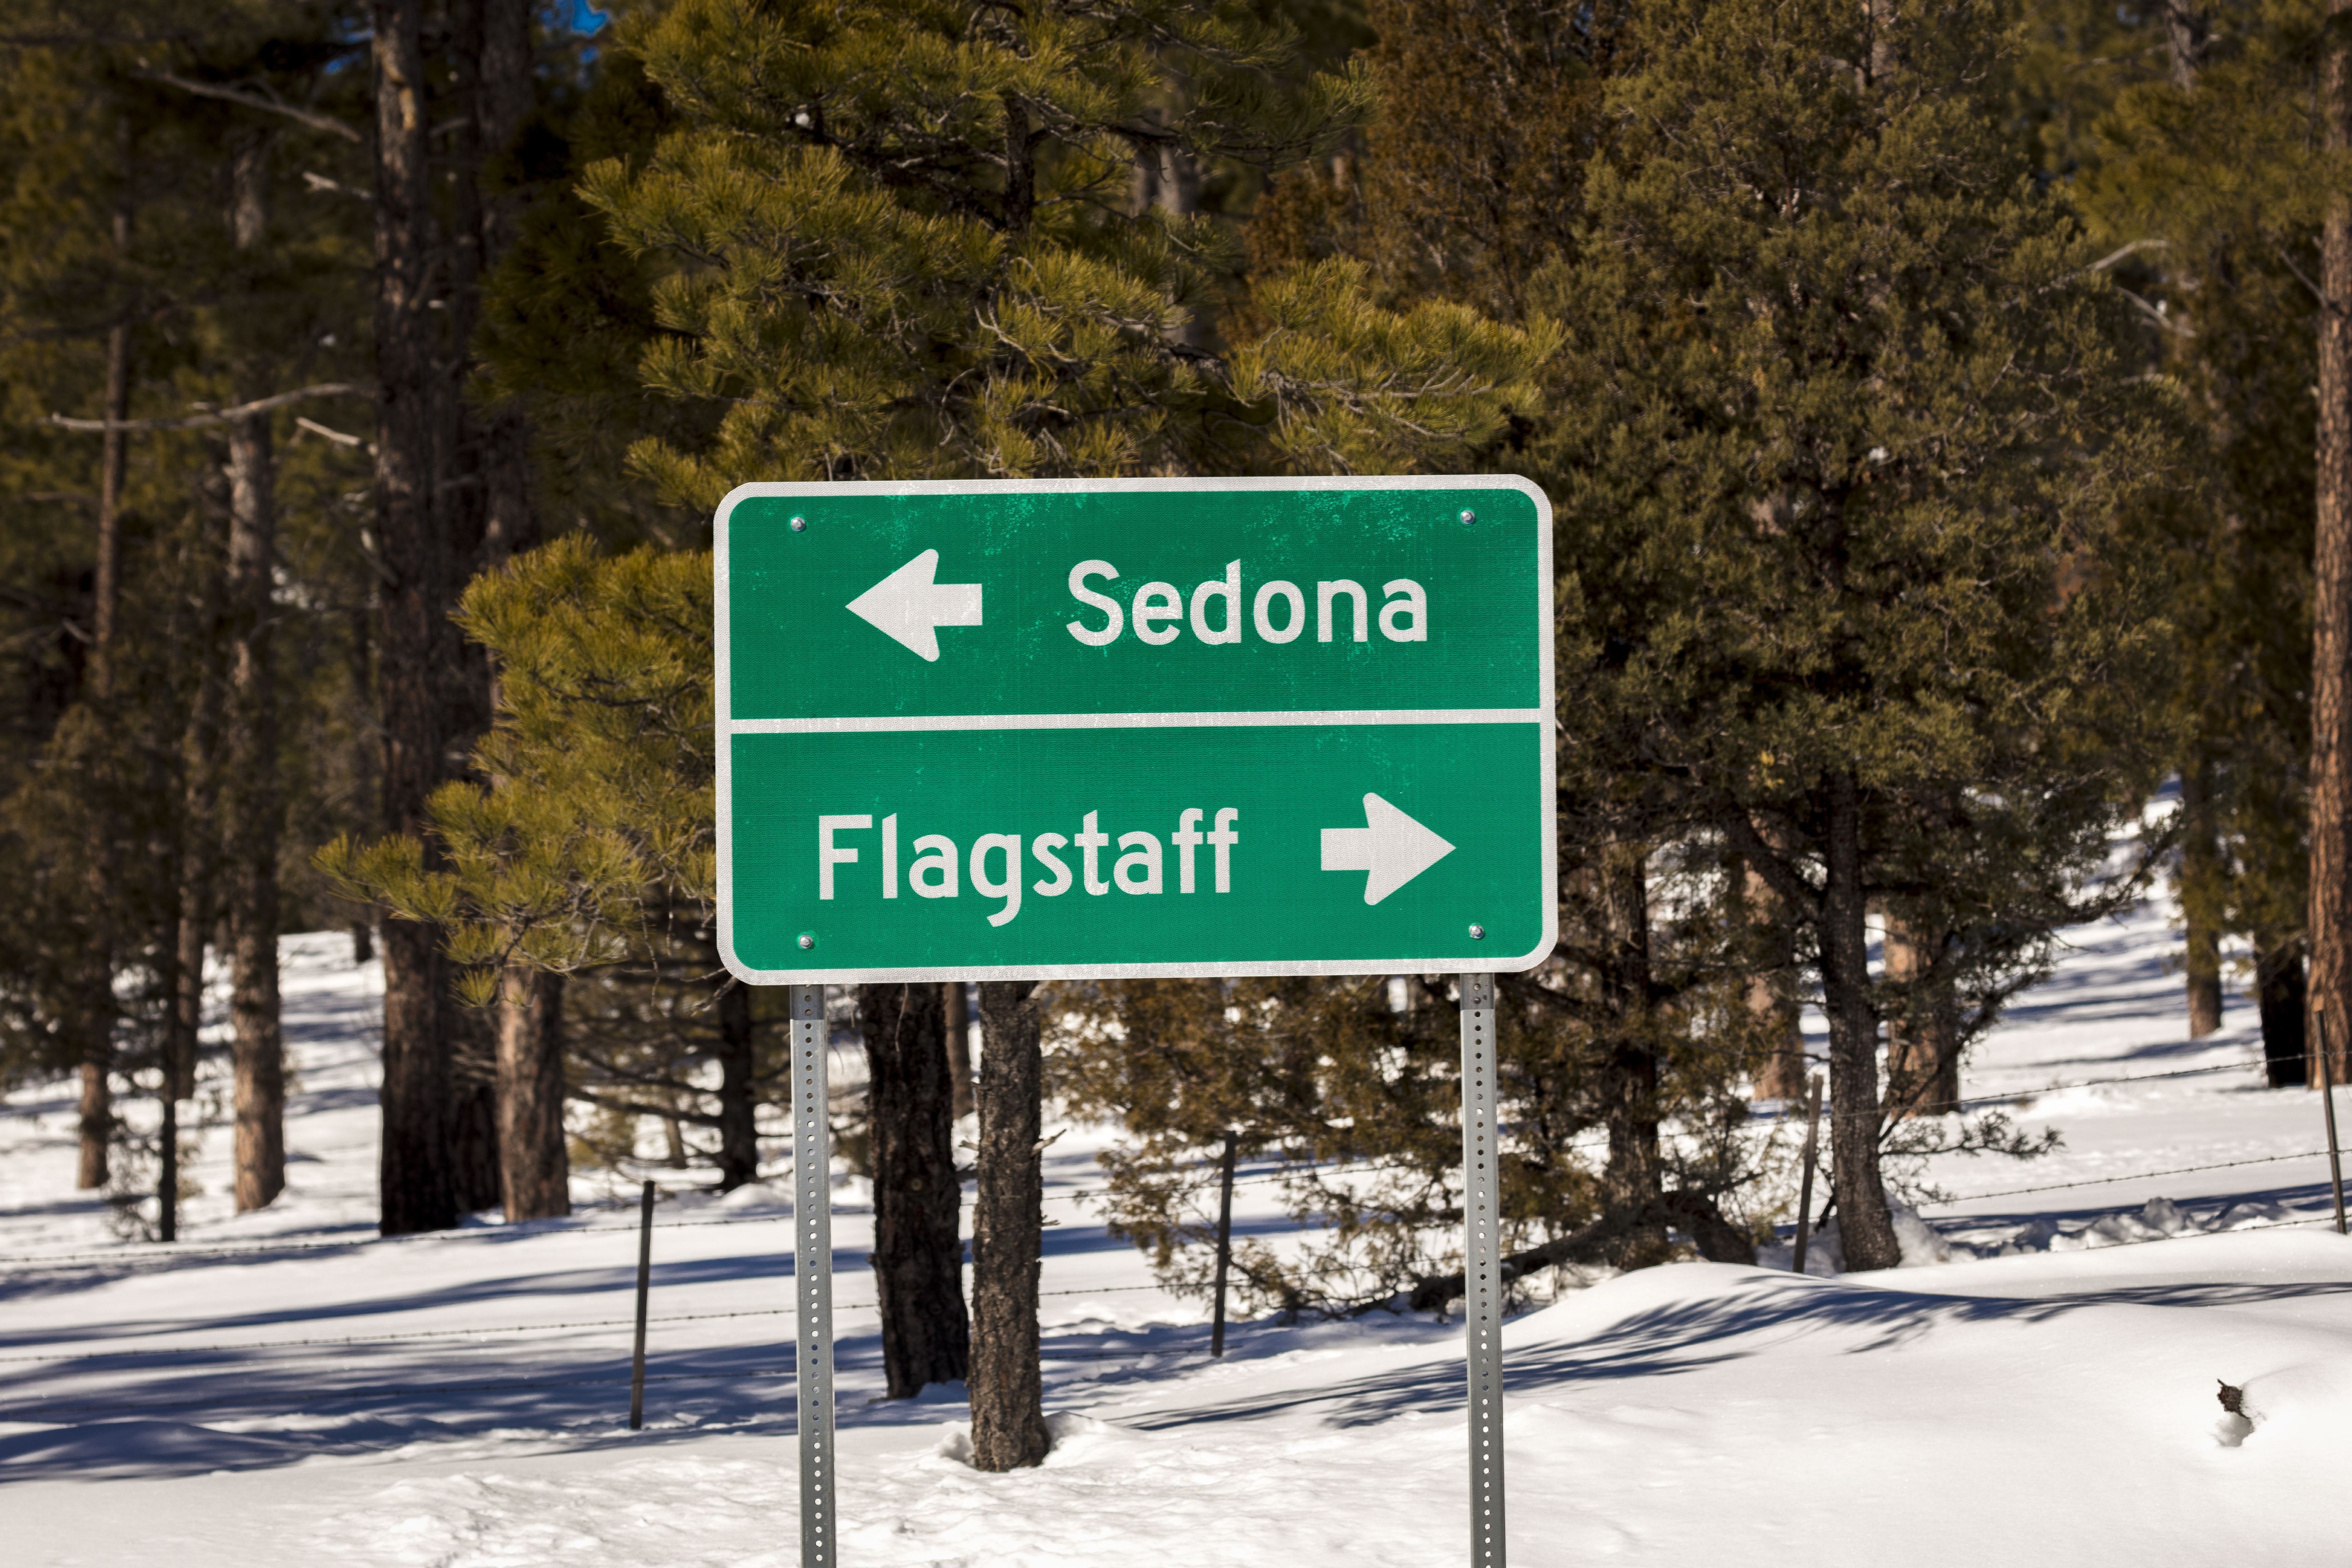 A standard road sign shows the way to Flagstaff Arizona and Sedona